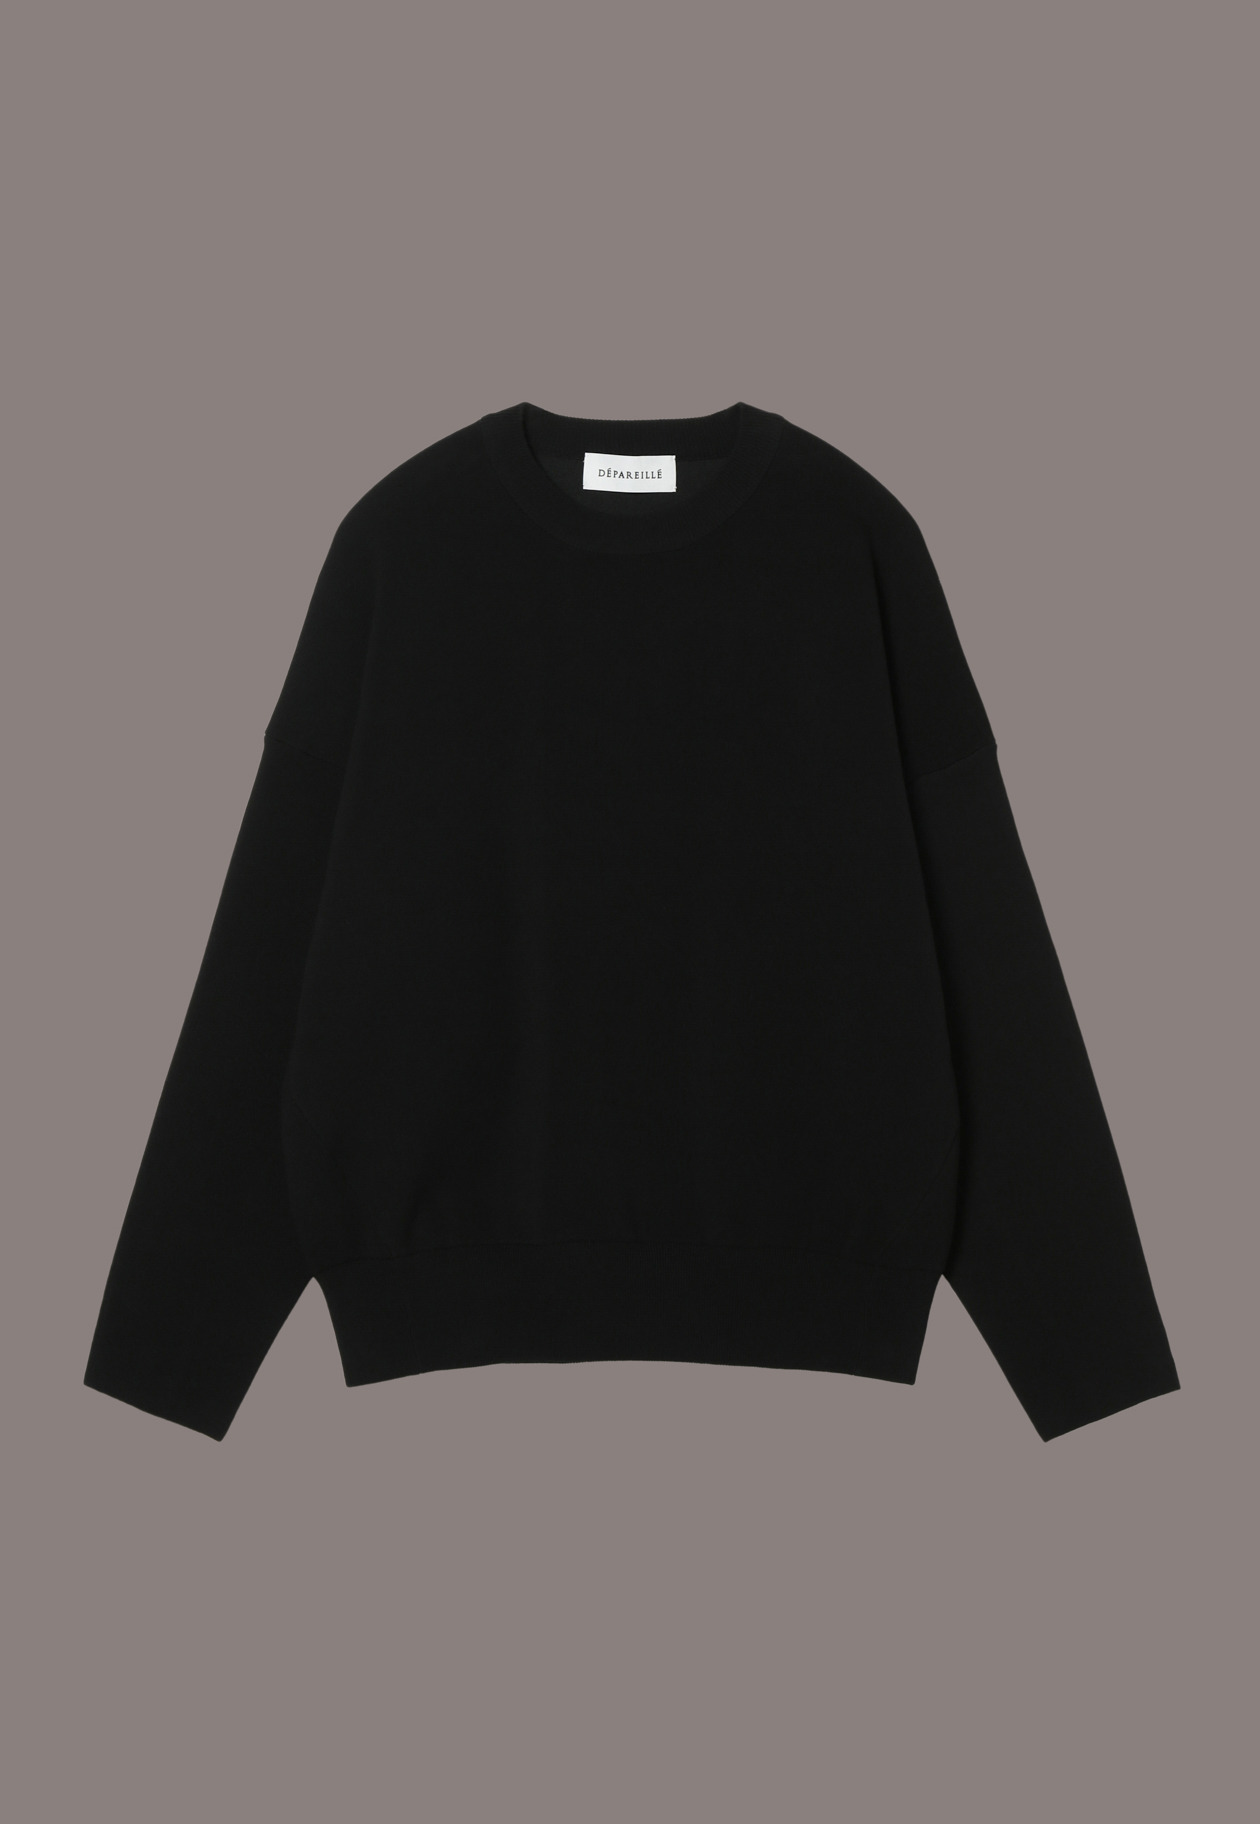 DOUBLE KNIT PULL-OVER 詳細画像 Black 1